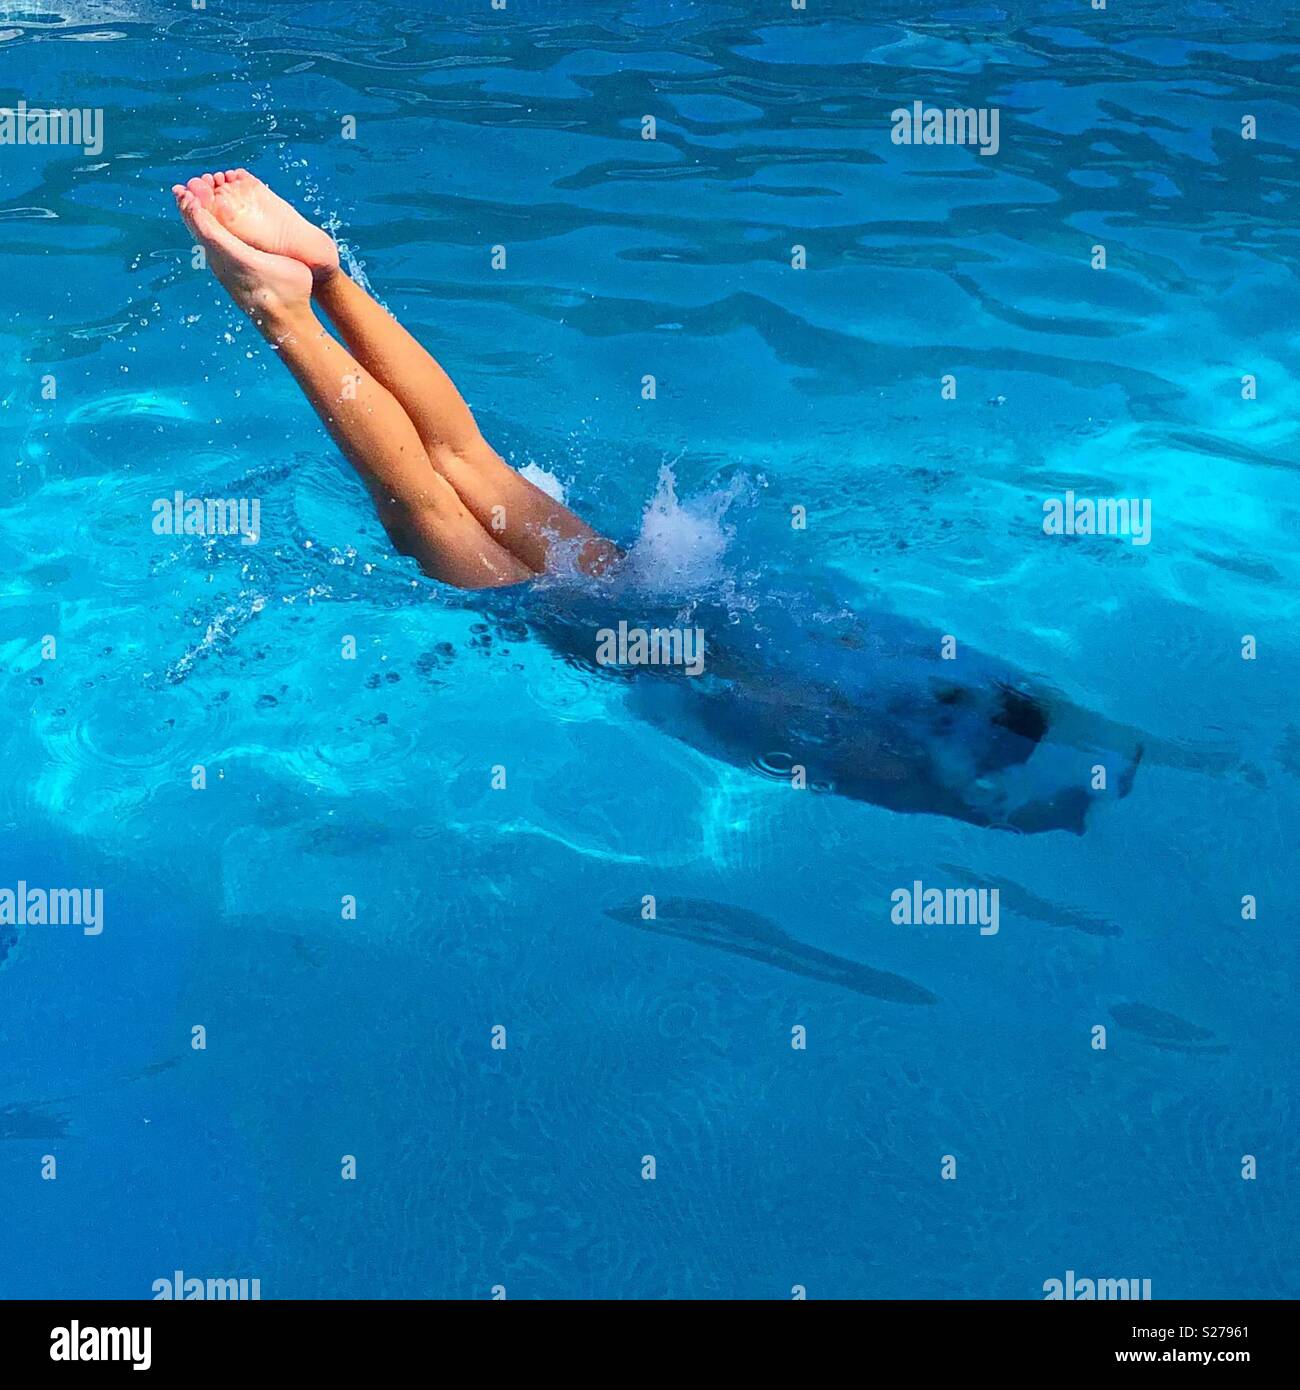 Girl diving into the swimming pool on a summer afternoon Stock Photo